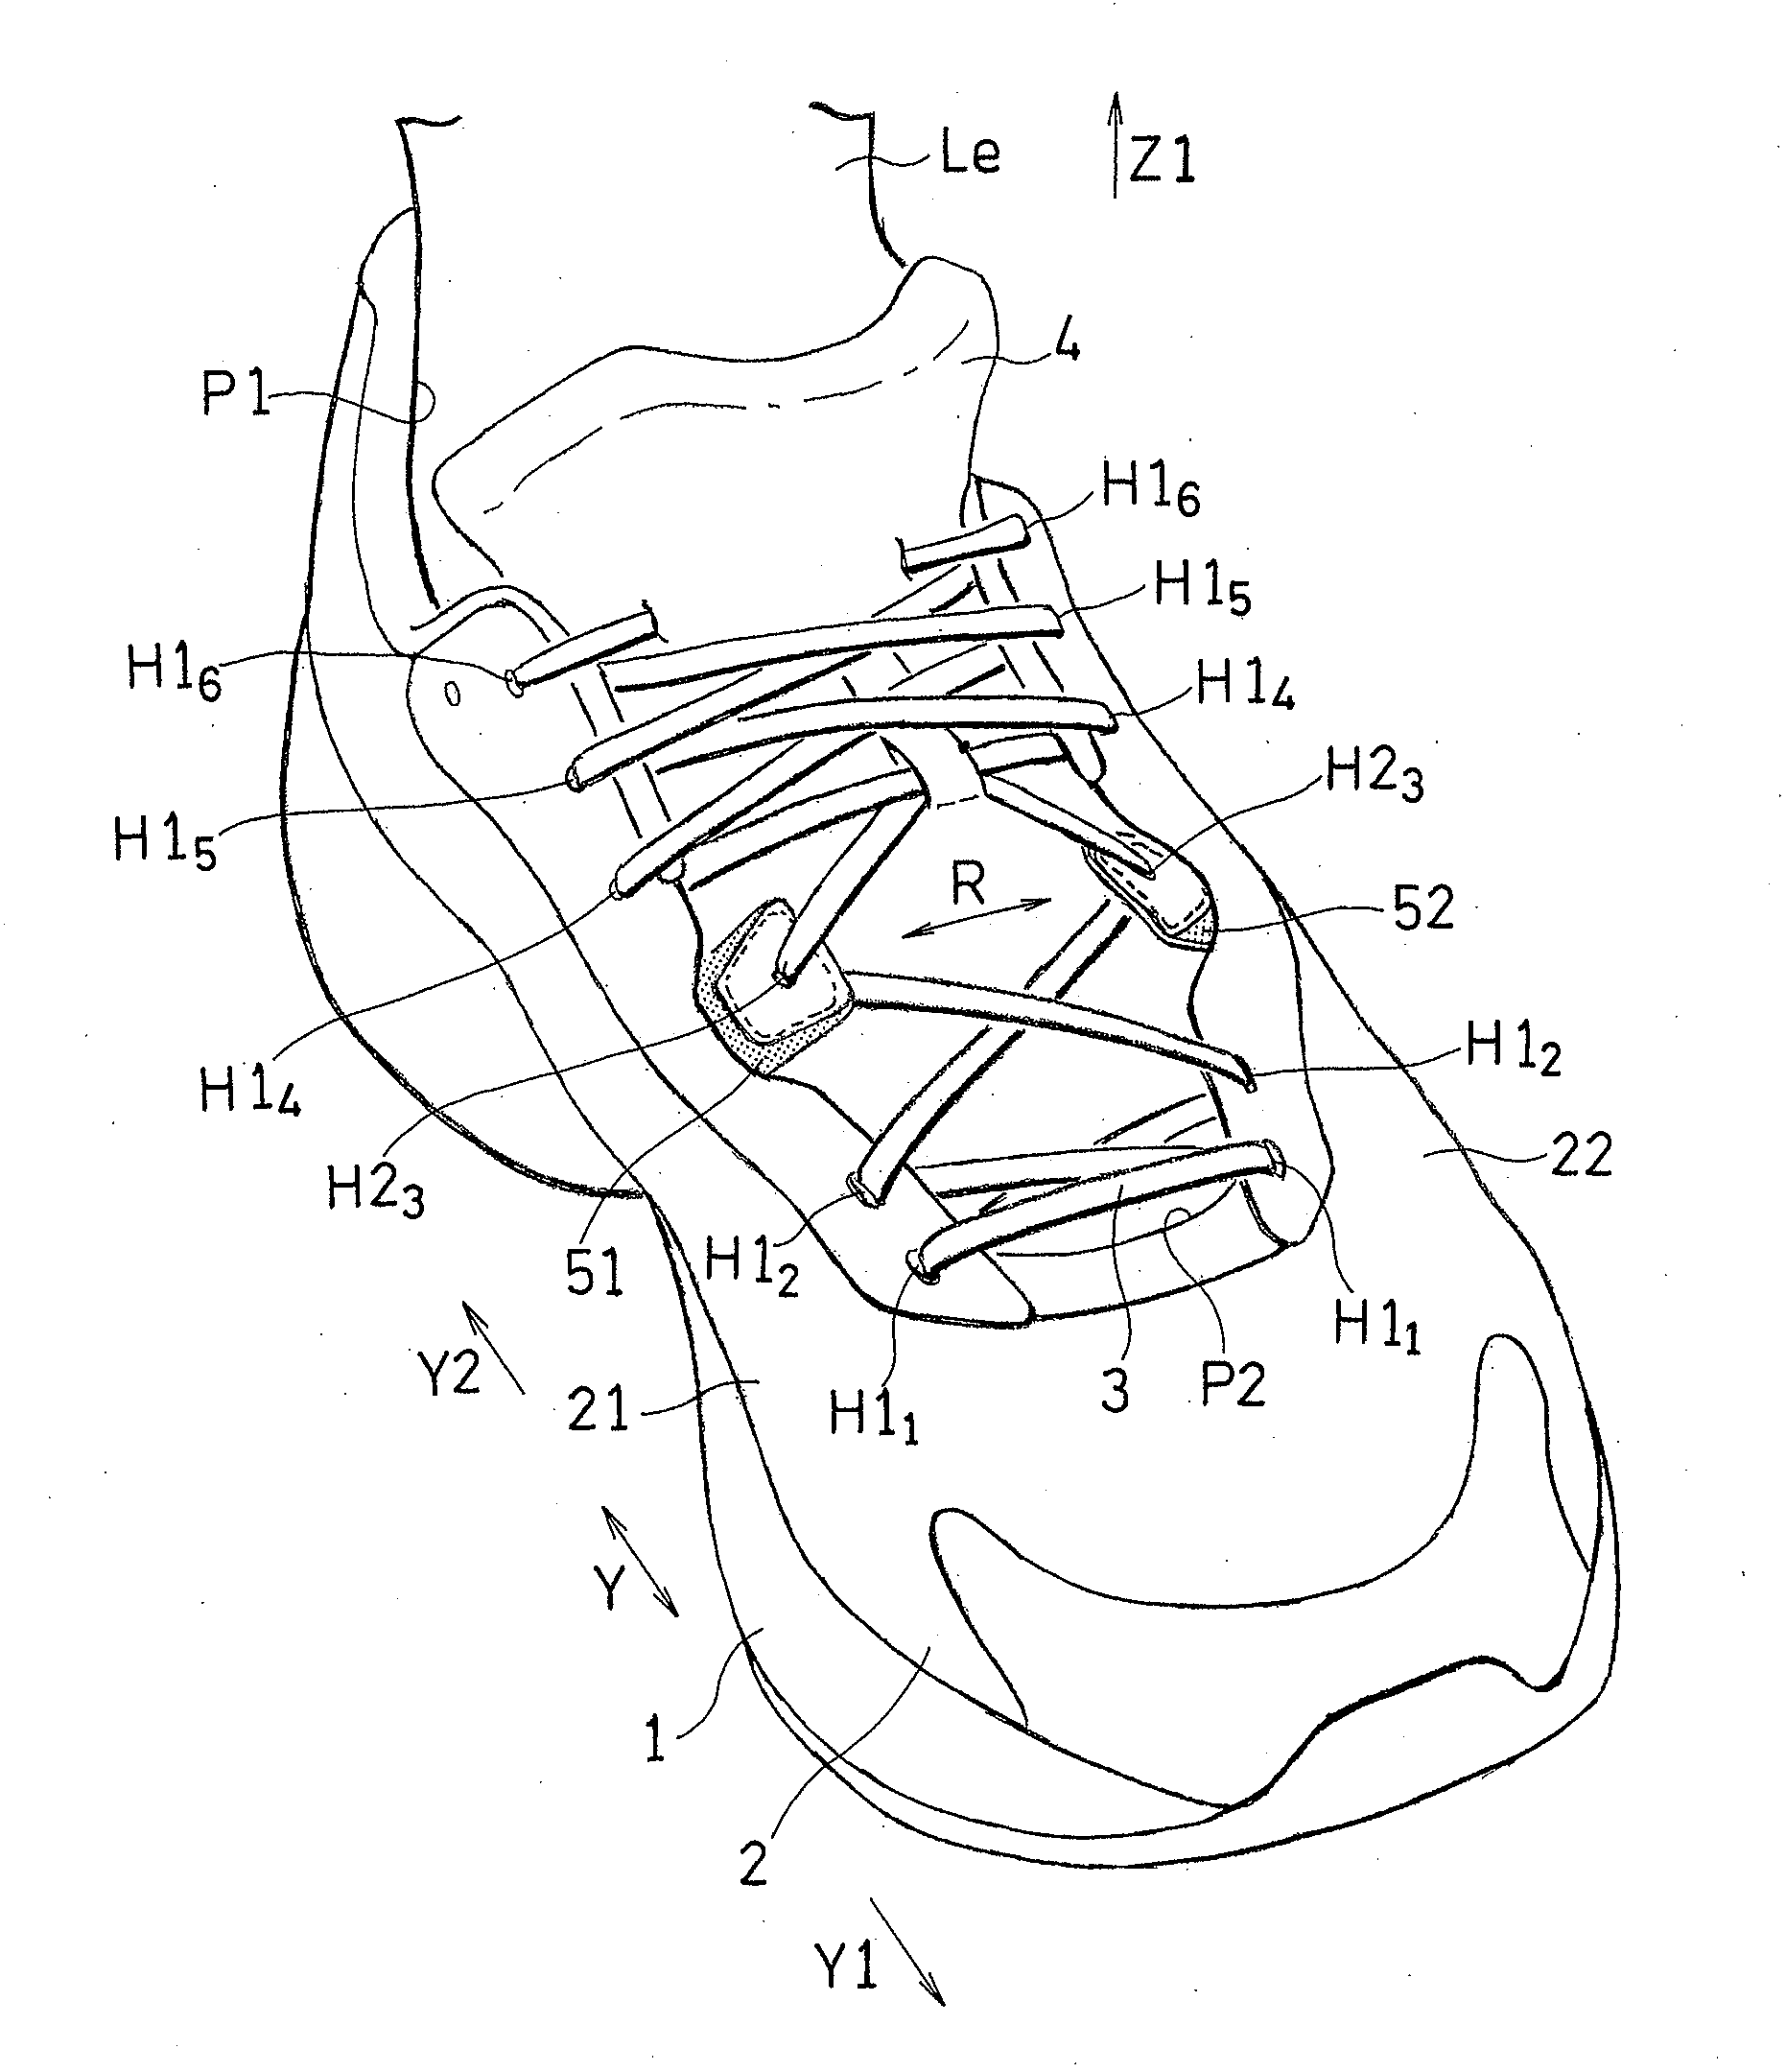 Shoe having lace fitting structure